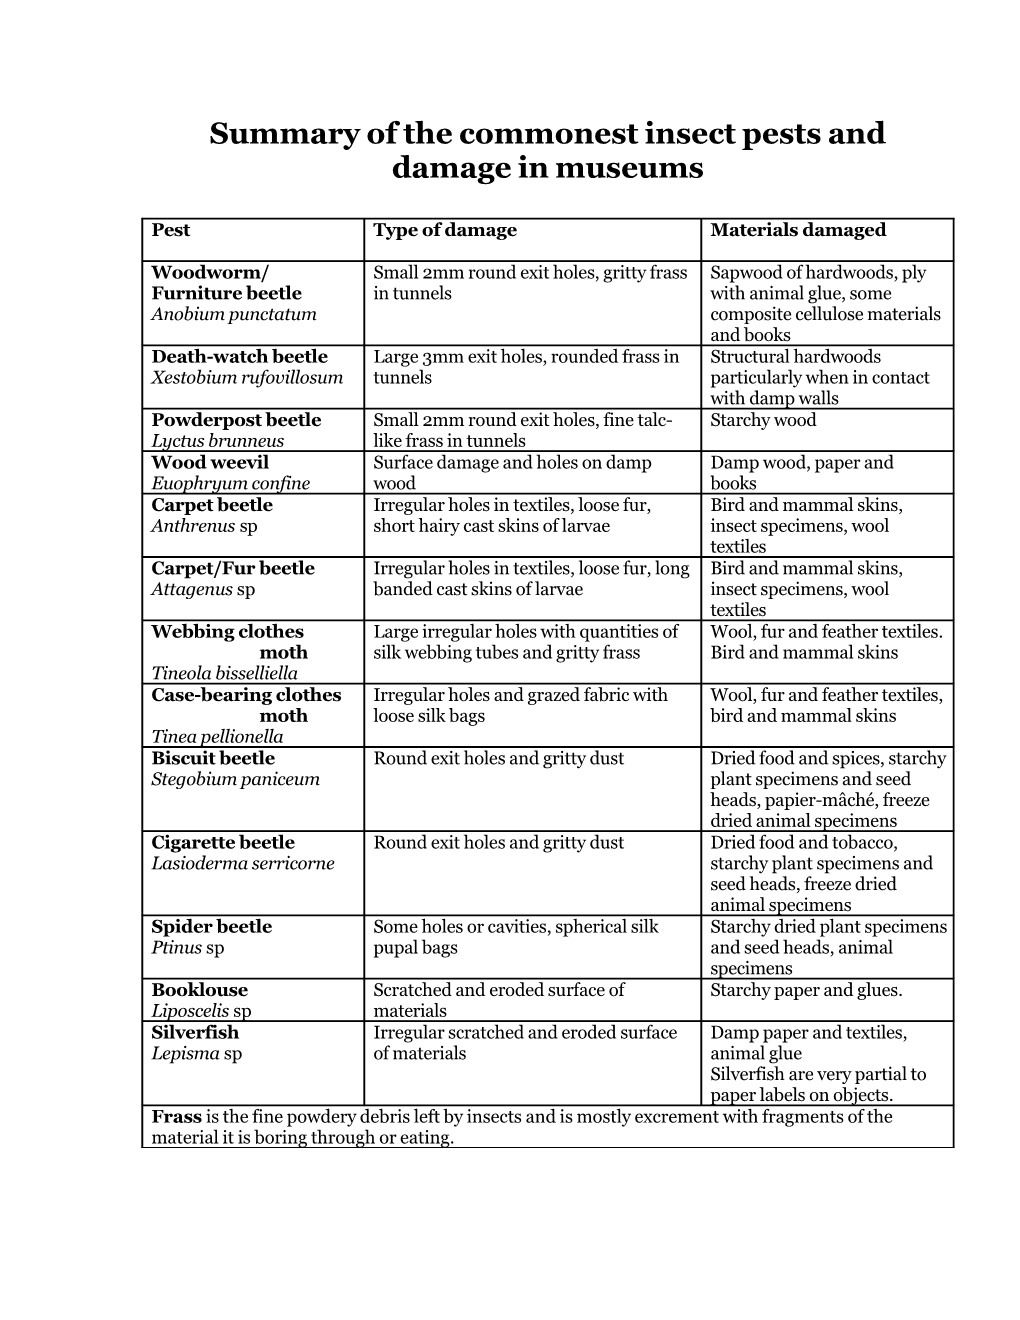 Summary of the Commonest Insect Pests and Damage in UK Museums